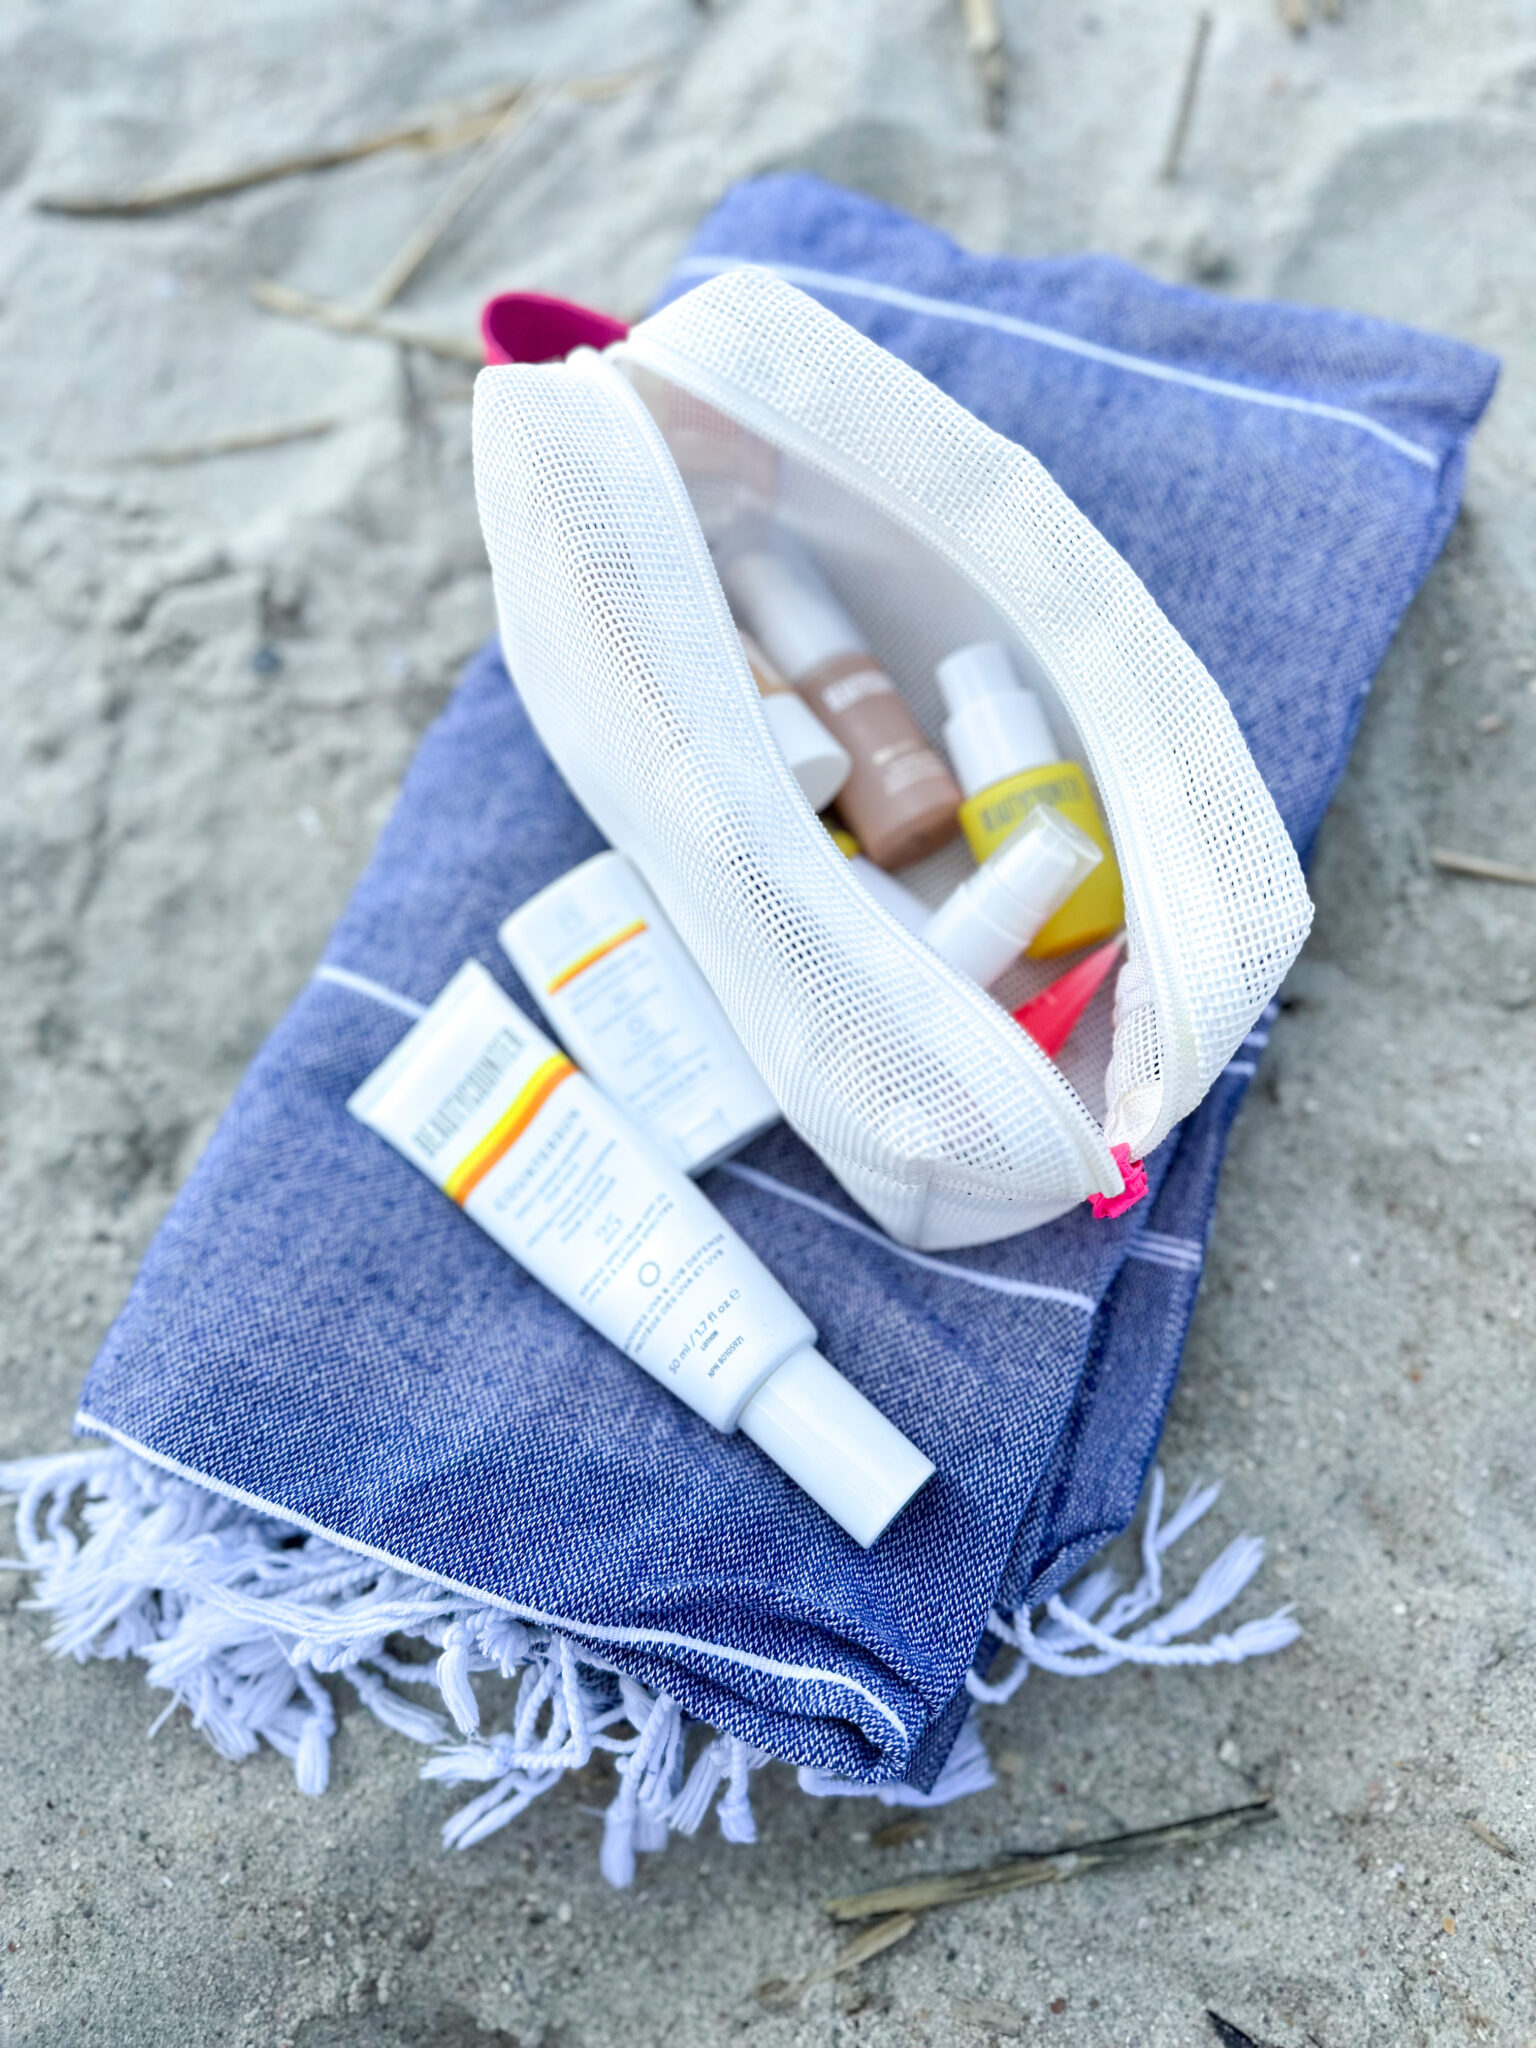 summer skincare tips: Beautycounter products on blue beach towel